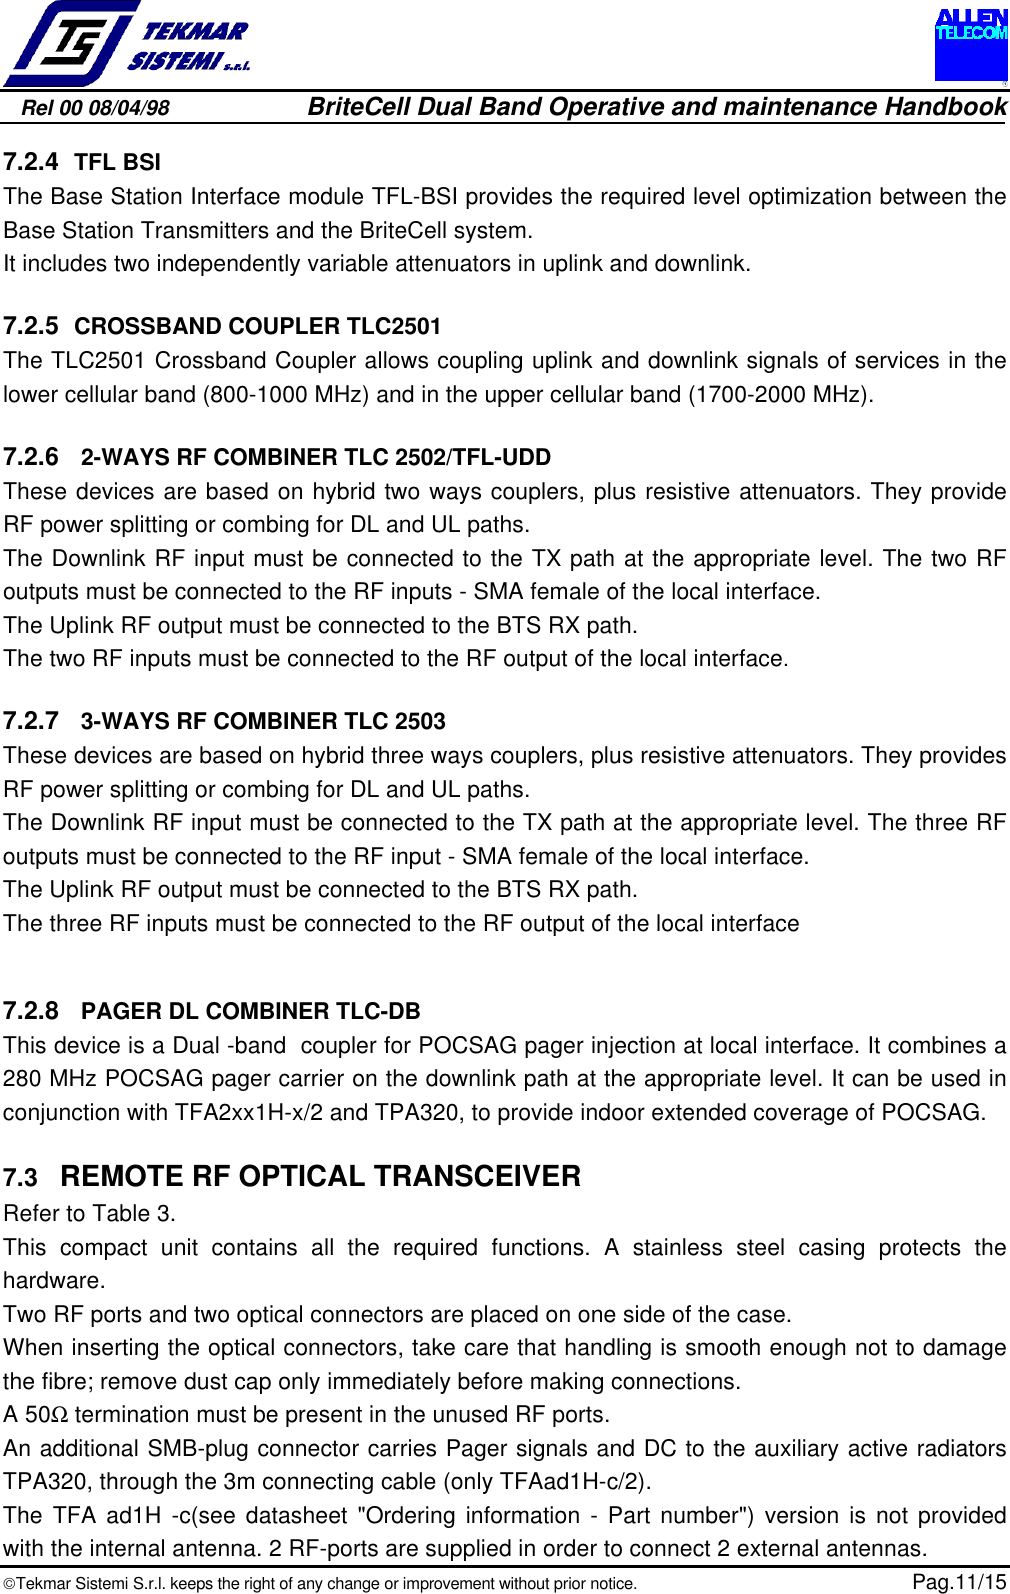 Rel 00 08/04/98                         BriteCell Dual Band Operative and maintenance HandbookTekmar Sistemi S.r.l. keeps the right of any change or improvement without prior notice.  Pag.11/157.2.4 TFL BSIThe Base Station Interface module TFL-BSI provides the required level optimization between theBase Station Transmitters and the BriteCell system.It includes two independently variable attenuators in uplink and downlink.7.2.5 CROSSBAND COUPLER TLC2501The TLC2501 Crossband Coupler allows coupling uplink and downlink signals of services in thelower cellular band (800-1000 MHz) and in the upper cellular band (1700-2000 MHz).7.2.6  2-WAYS RF COMBINER TLC 2502/TFL-UDDThese devices are based on hybrid two ways couplers, plus resistive attenuators. They provideRF power splitting or combing for DL and UL paths.The Downlink RF input must be connected to the TX path at the appropriate level. The two RFoutputs must be connected to the RF inputs - SMA female of the local interface.The Uplink RF output must be connected to the BTS RX path.The two RF inputs must be connected to the RF output of the local interface.7.2.7  3-WAYS RF COMBINER TLC 2503These devices are based on hybrid three ways couplers, plus resistive attenuators. They providesRF power splitting or combing for DL and UL paths.The Downlink RF input must be connected to the TX path at the appropriate level. The three RFoutputs must be connected to the RF input - SMA female of the local interface.The Uplink RF output must be connected to the BTS RX path.The three RF inputs must be connected to the RF output of the local interface7.2.8  PAGER DL COMBINER TLC-DBThis device is a Dual -band  coupler for POCSAG pager injection at local interface. It combines a280 MHz POCSAG pager carrier on the downlink path at the appropriate level. It can be used inconjunction with TFA2xx1H-x/2 and TPA320, to provide indoor extended coverage of POCSAG.7.3  REMOTE RF OPTICAL TRANSCEIVERRefer to Table 3.This compact unit contains all the required functions. A stainless steel casing protects thehardware.Two RF ports and two optical connectors are placed on one side of the case.When inserting the optical connectors, take care that handling is smooth enough not to damagethe fibre; remove dust cap only immediately before making connections.A 50Ω termination must be present in the unused RF ports.An additional SMB-plug connector carries Pager signals and DC to the auxiliary active radiatorsTPA320, through the 3m connecting cable (only TFAad1H-c/2).The TFA ad1H -c(see datasheet &quot;Ordering information - Part number&quot;) version is not providedwith the internal antenna. 2 RF-ports are supplied in order to connect 2 external antennas.